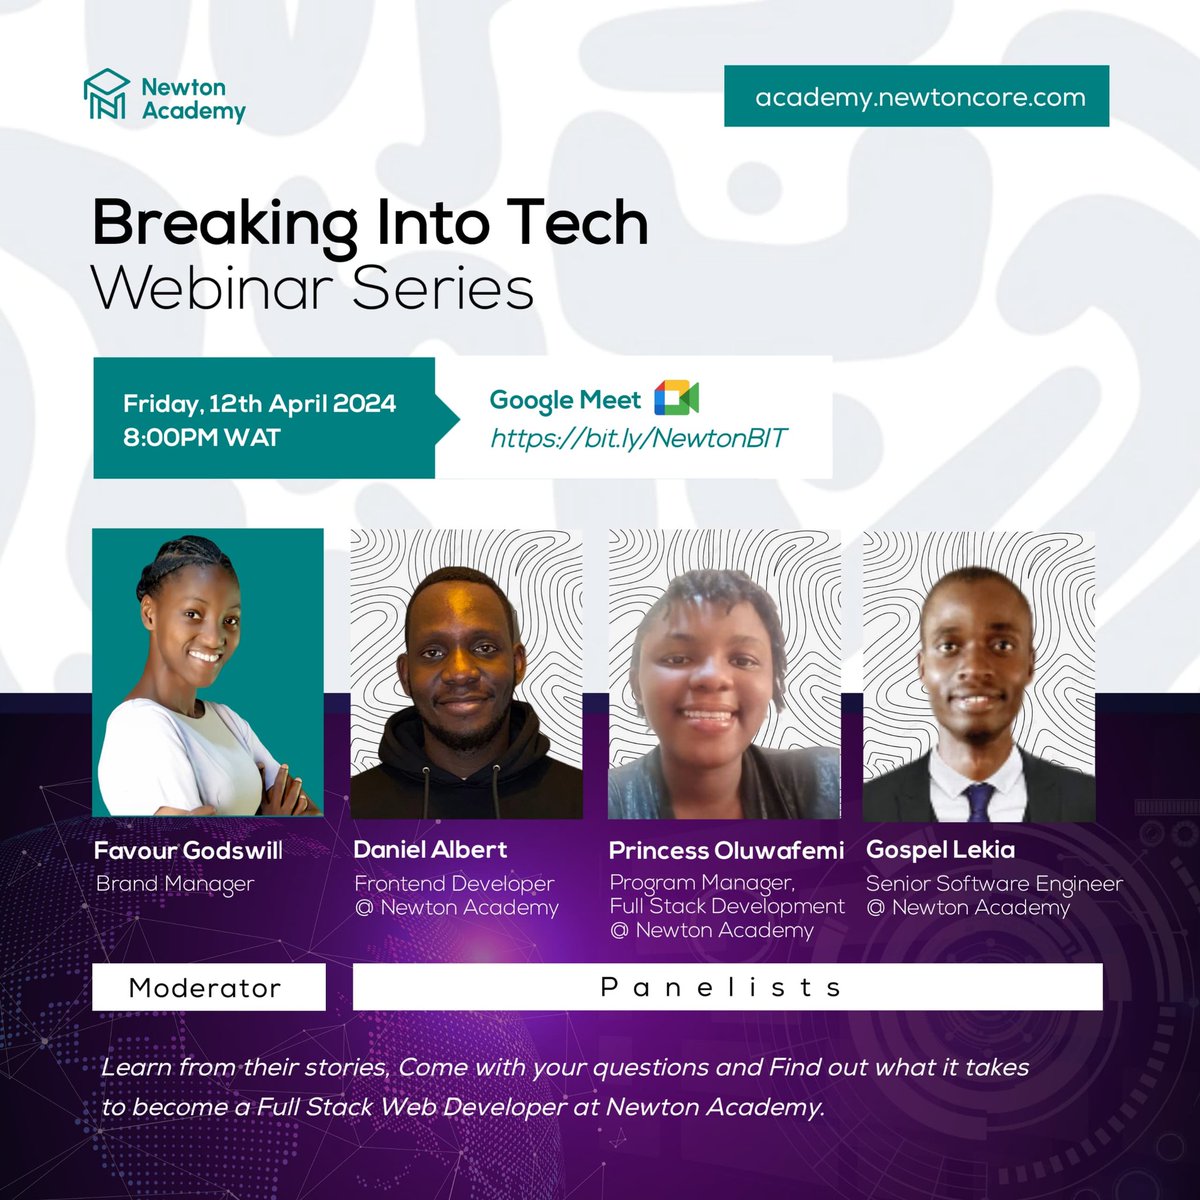 Join us for our Breaking Into Tech webinar series as we delve into the captivating journey of 3 Web Developers and a student in training at Newton Academy.

Date and Time: Friday, 12th April 2024, 8pm
Where: Google Meet - bit.ly/Newton_BIT

#BreakingIntoTech